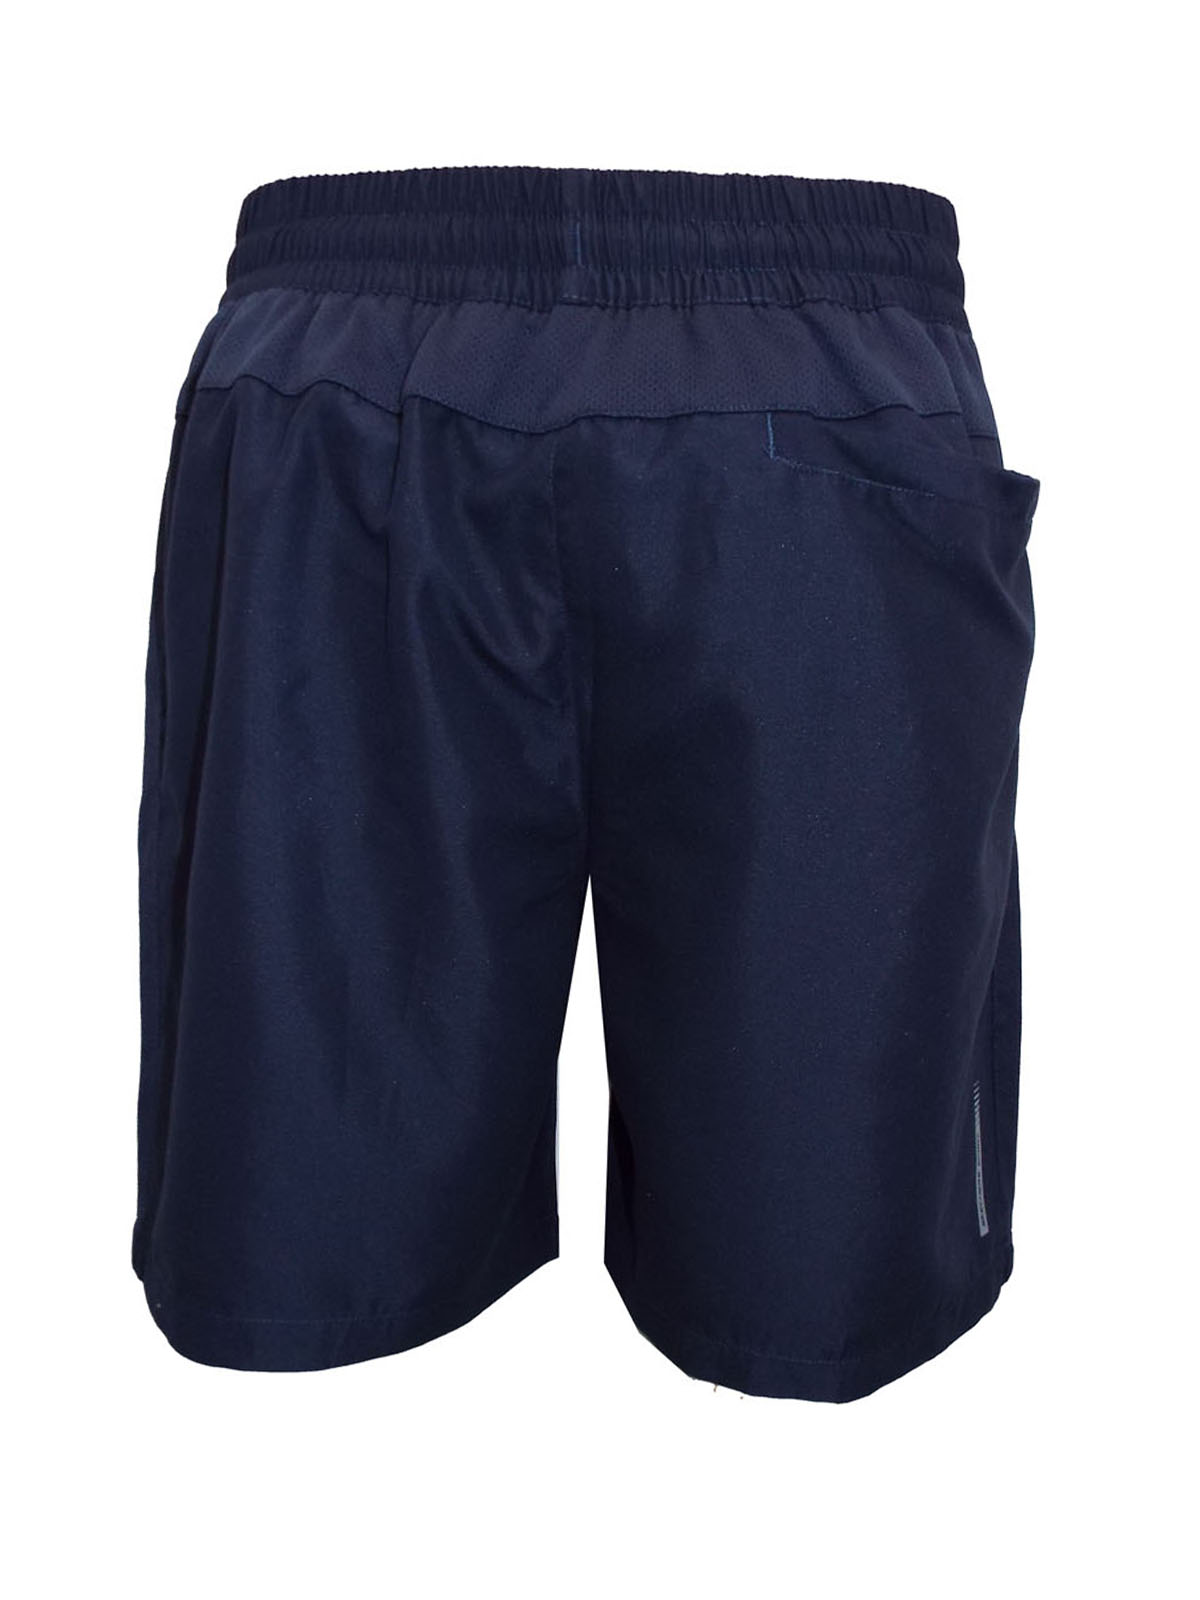 Skechers - - Skechers ASSORTED Quick Dry Swim Shorts - Size Small to ...